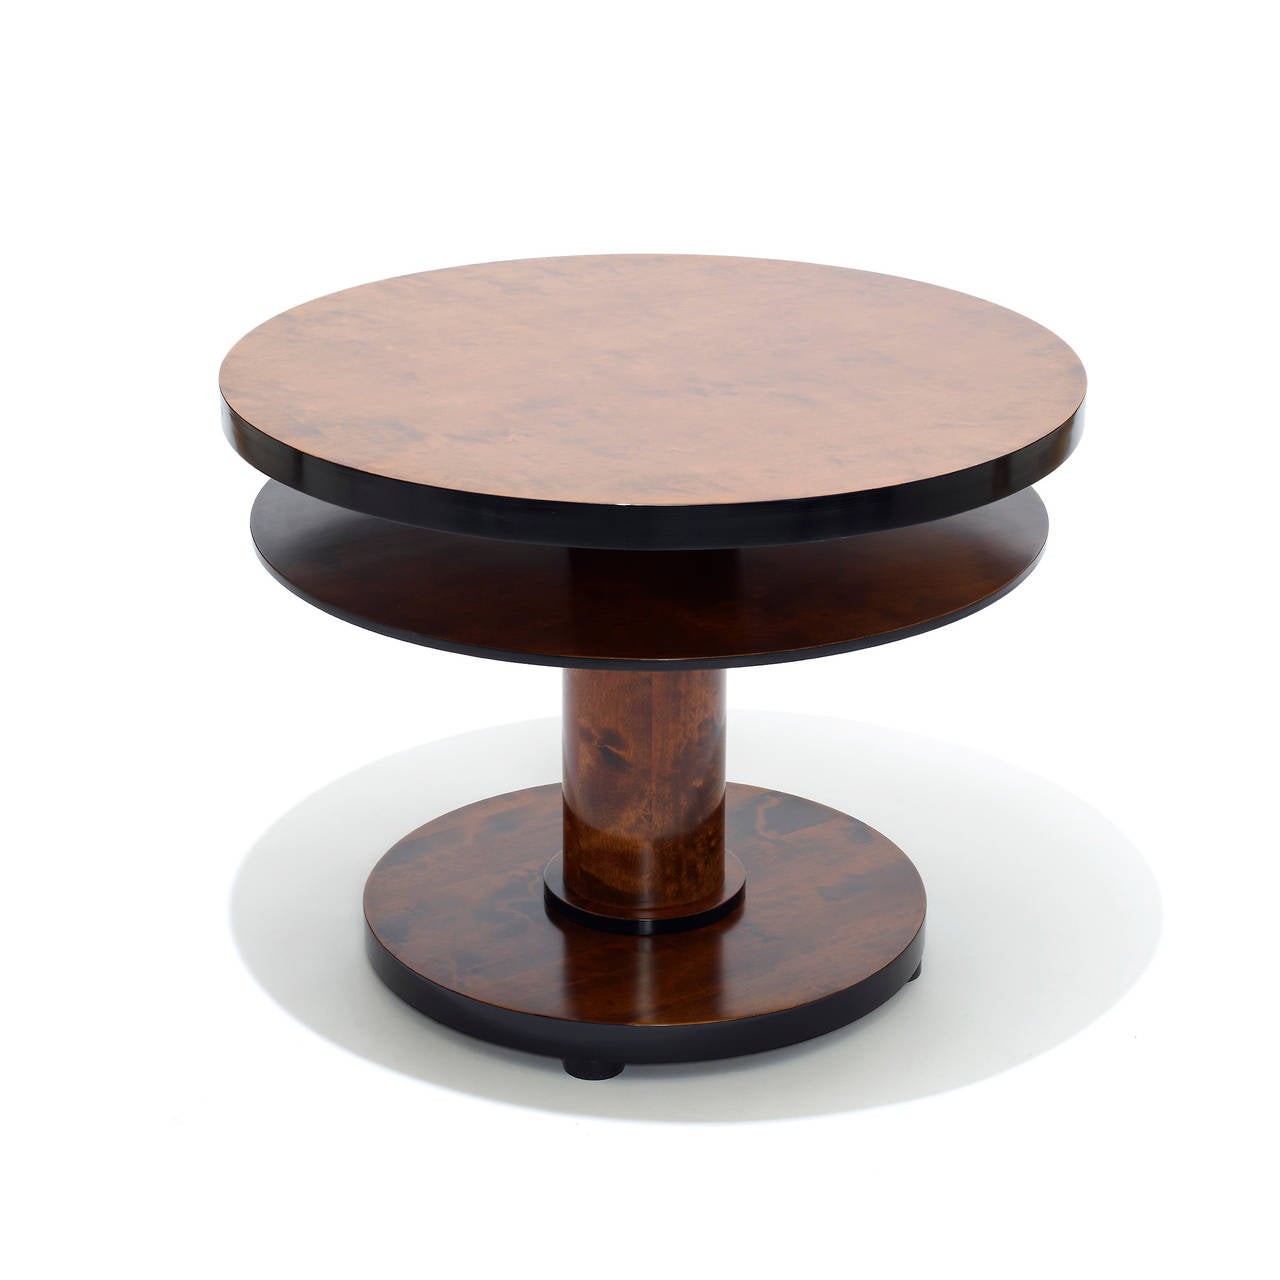 Functionalist side or occasional table featuring round shelf centered under round top, for magazines and such, in Baltic birch stained in two shades, Sweden, circa 1930.